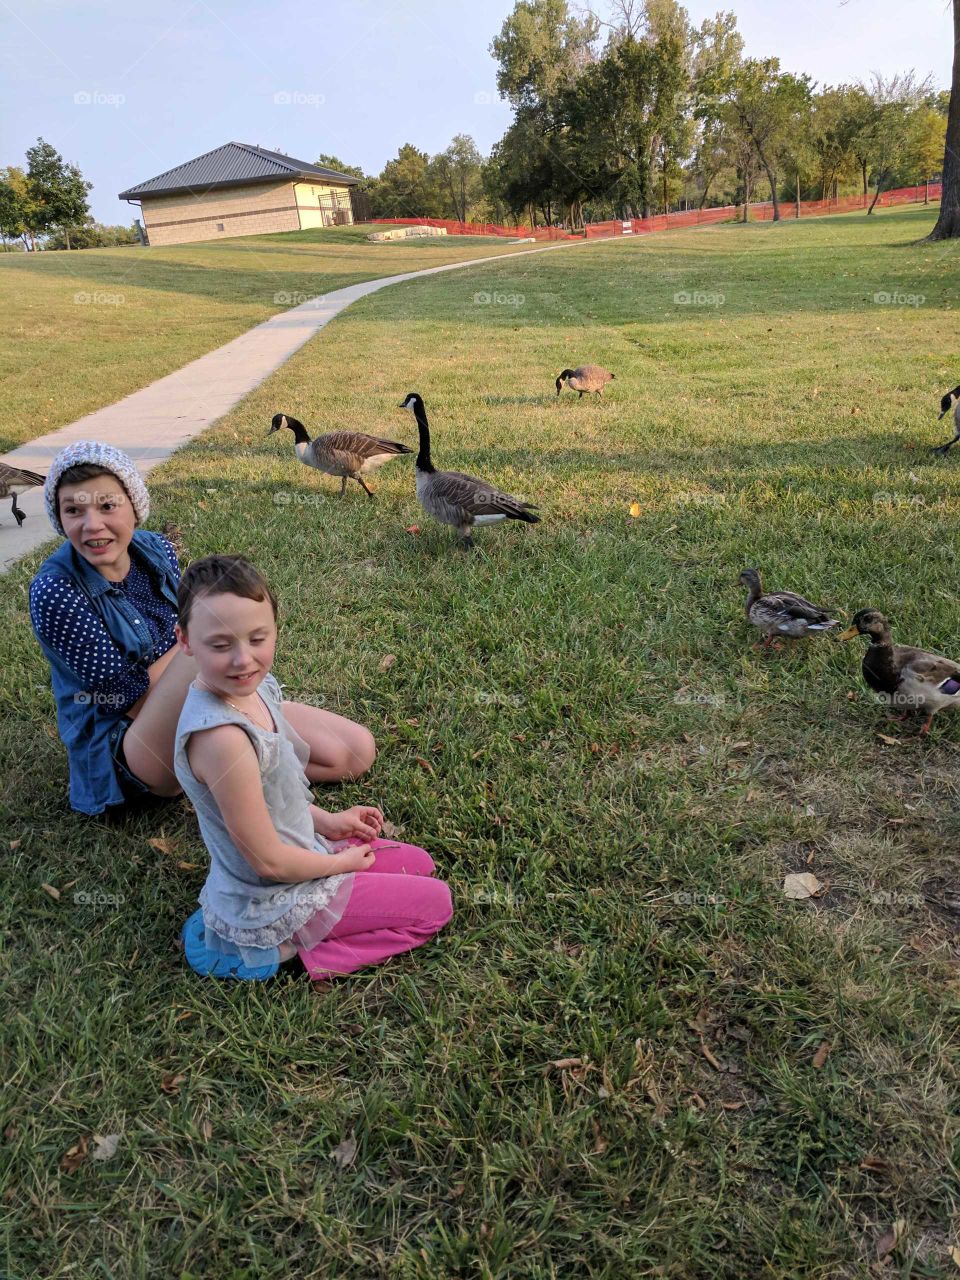 The girls at the park feeding the geese and ducks on a breezy afternoon. sunny, hot, summer, smelly, loud, bread, fun.